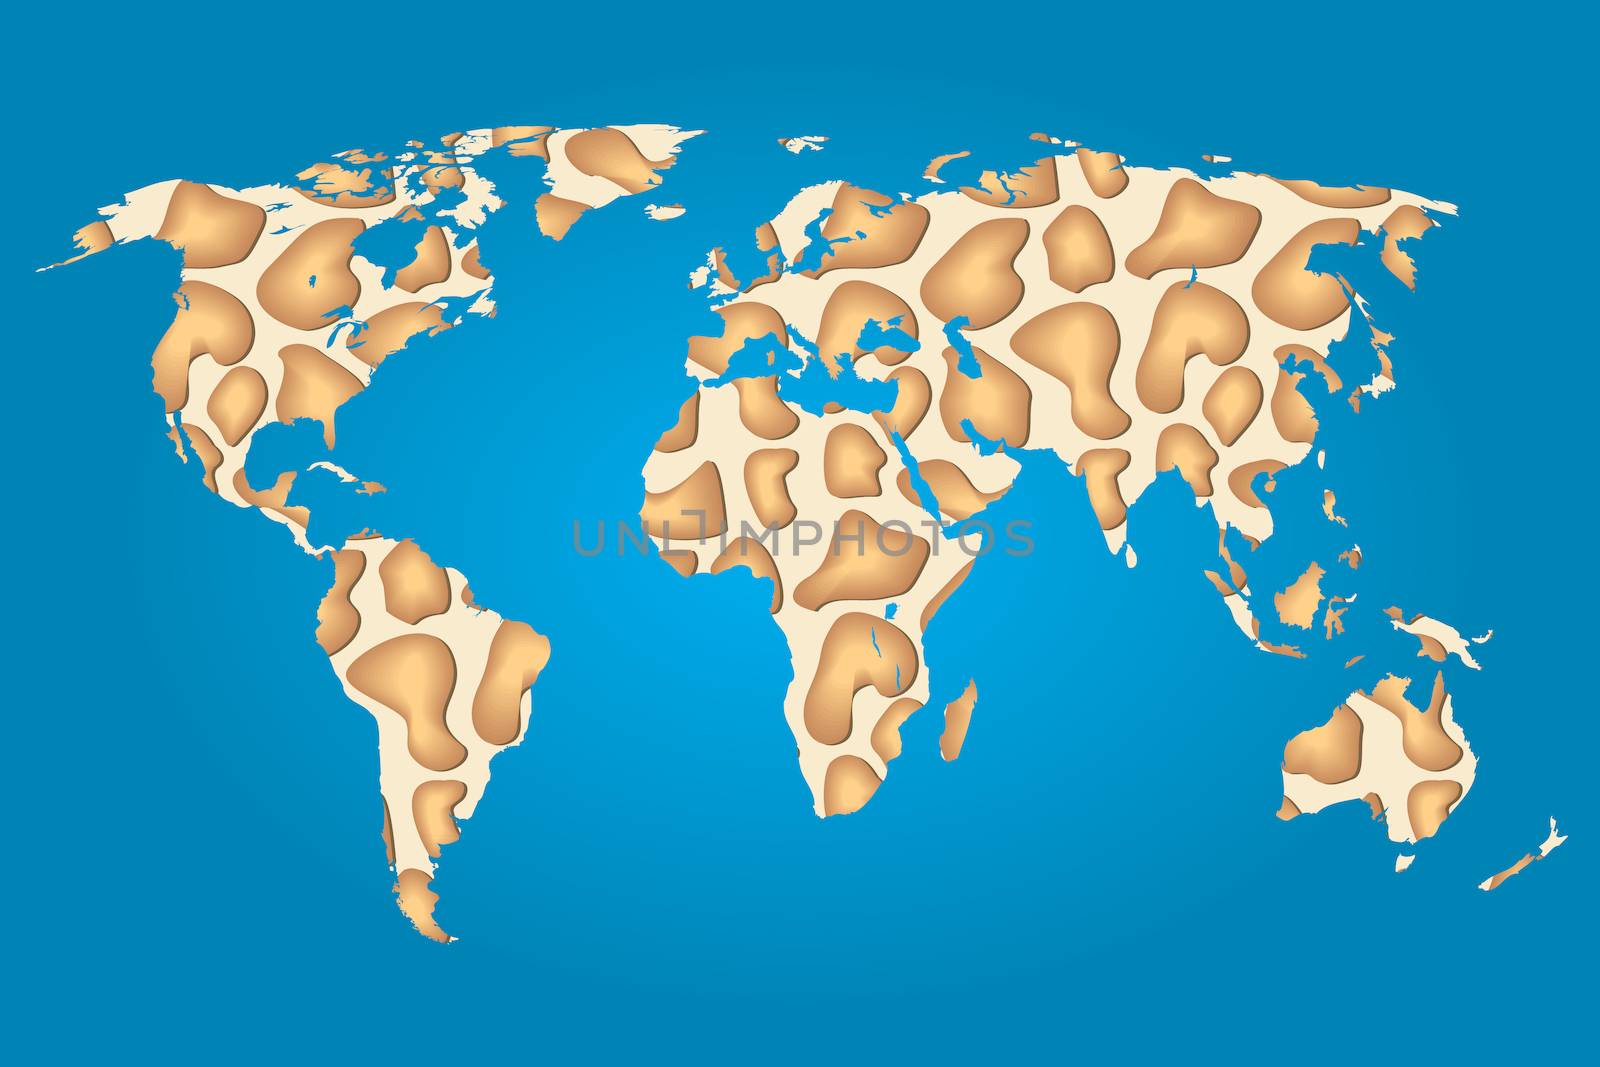 Map of the world filled with a Giraffe pattern